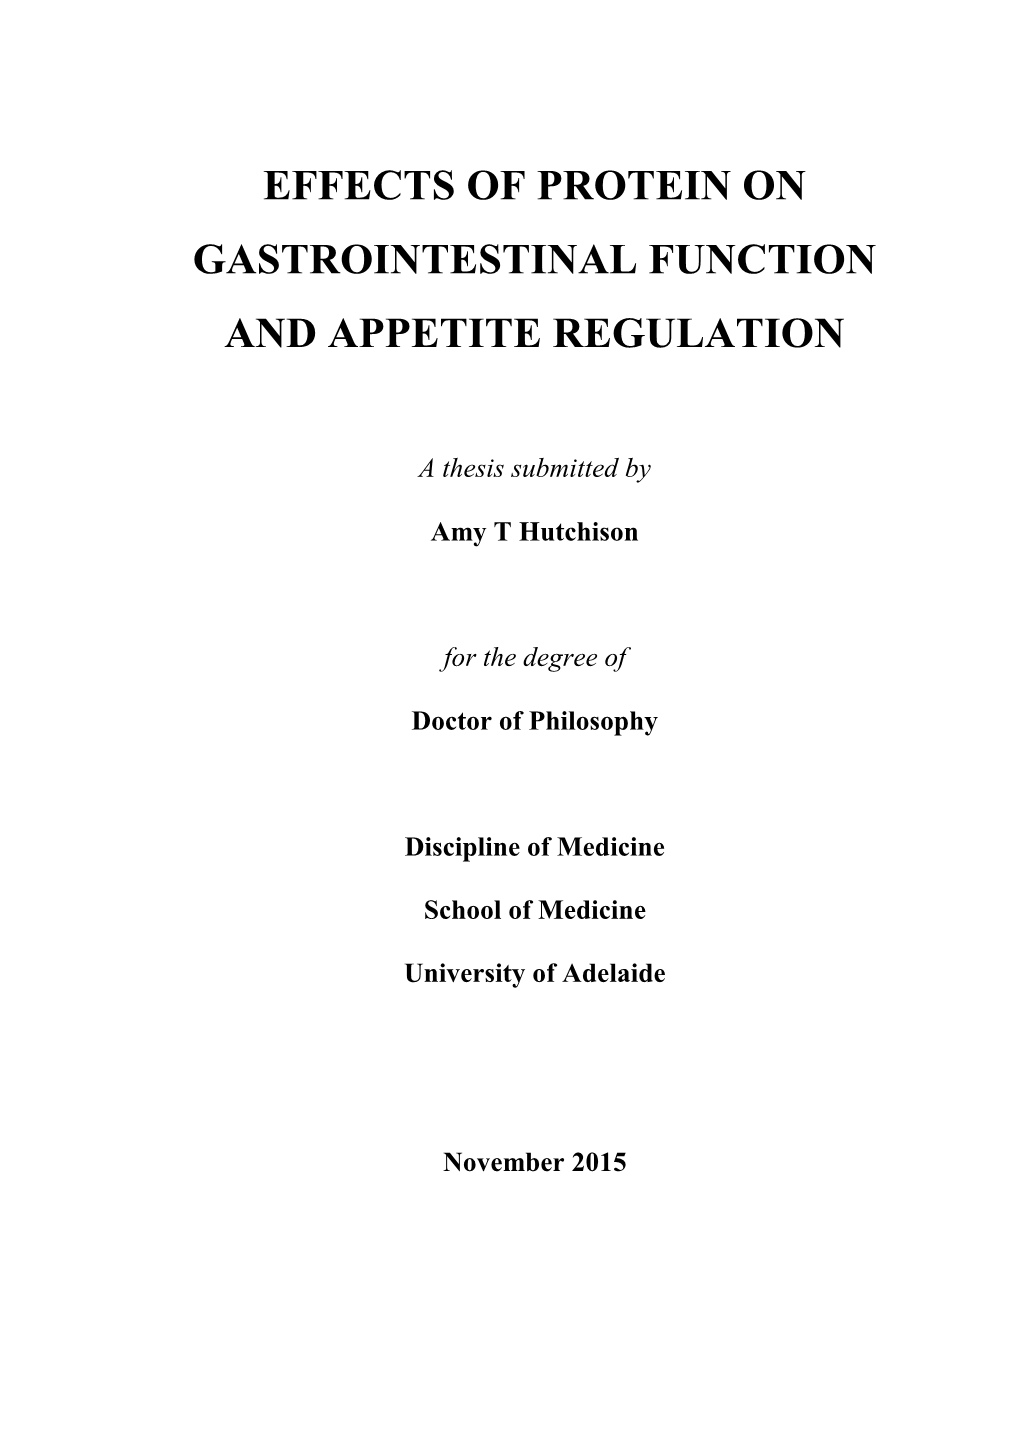 Effects of Protein on Gastrointestinal Function and Appetite Regulation